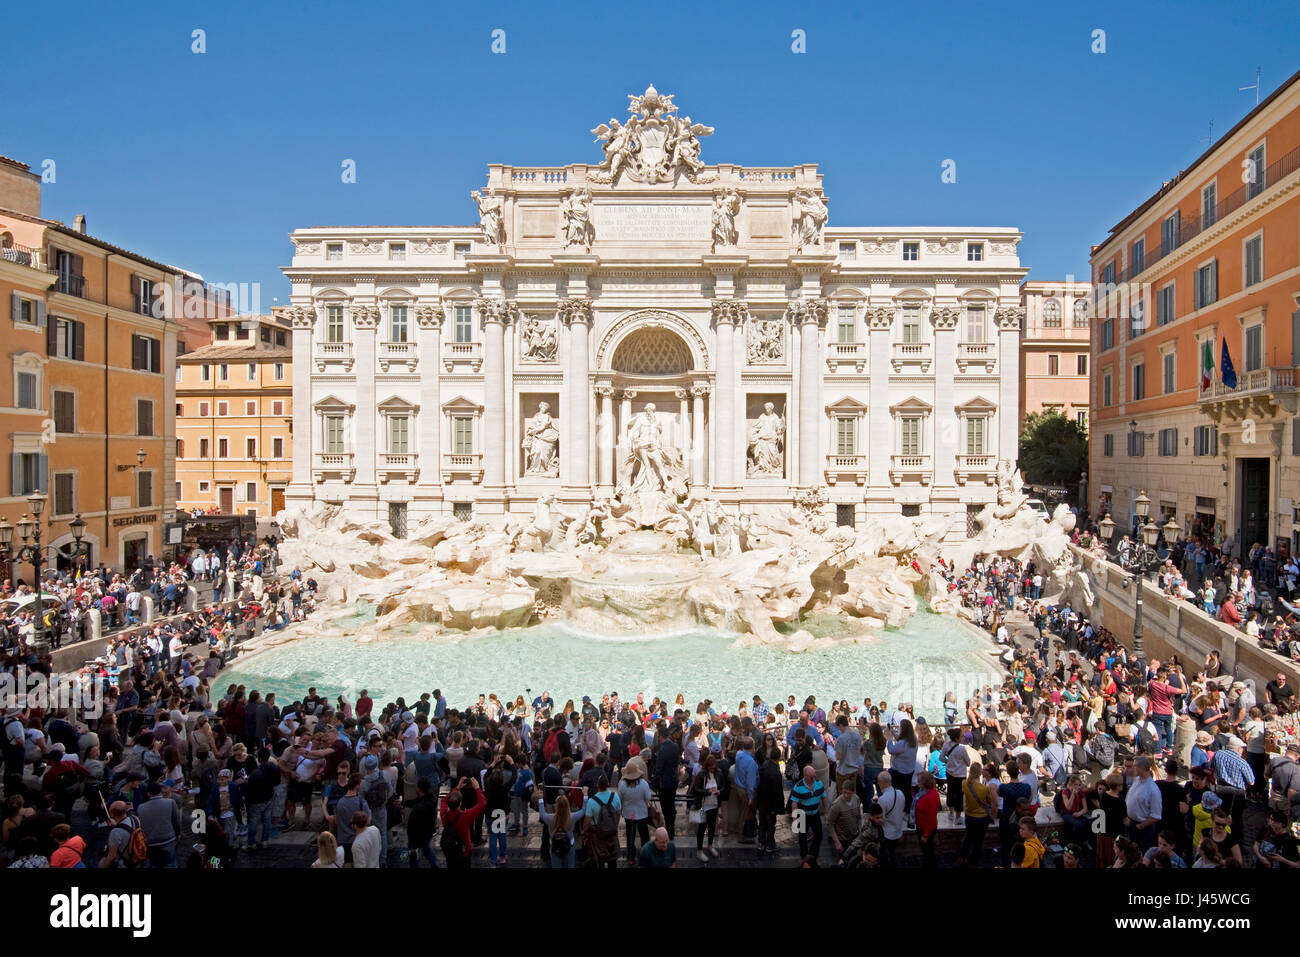 An aerial view of The Trevi Fountain 'Fontana di Trevi' in Rome with crowds of tourists and visitors on a sunny day with blue sky. Stock Photo